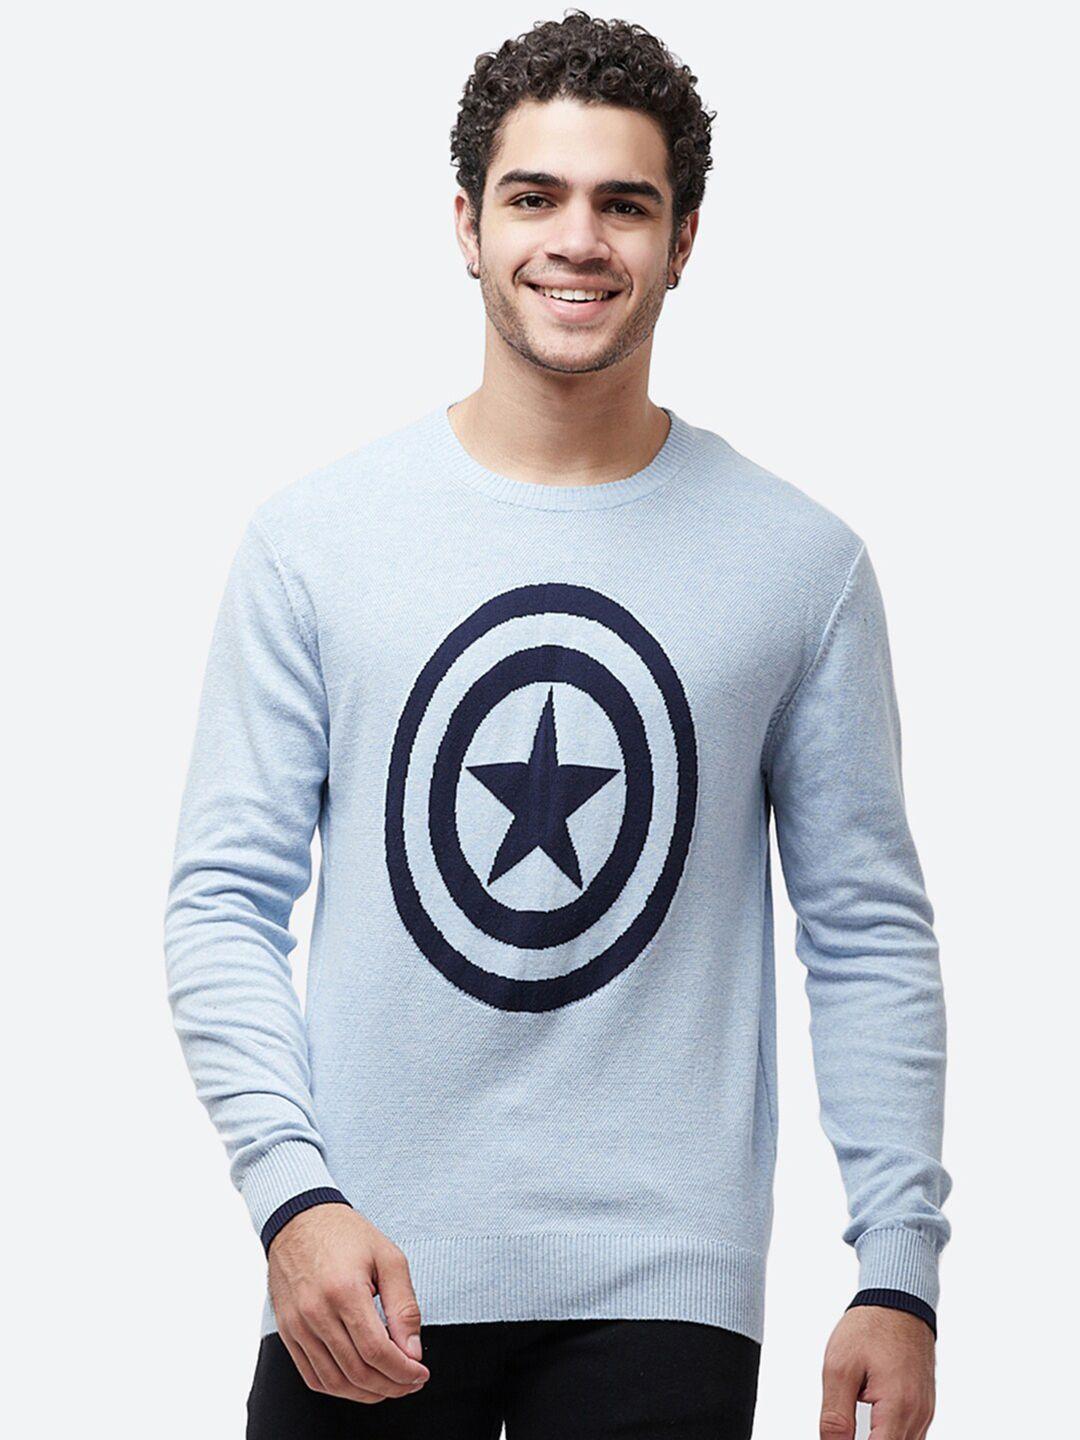 free-authority-men-blue-captain-america-logo-printed-pure-cotton-pullover-sweater